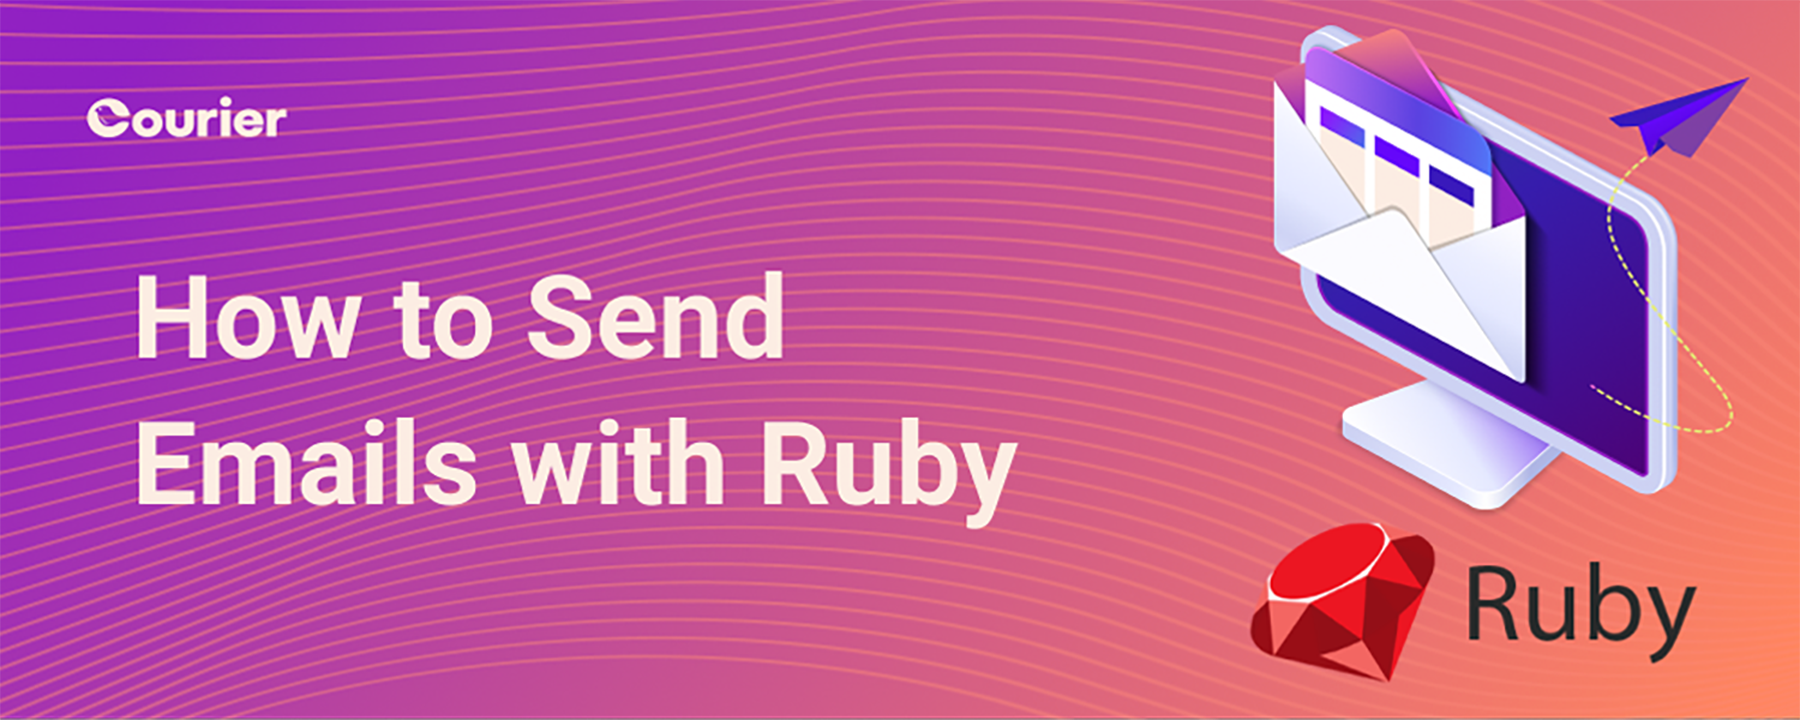 How To Send Emails With Ruby Header